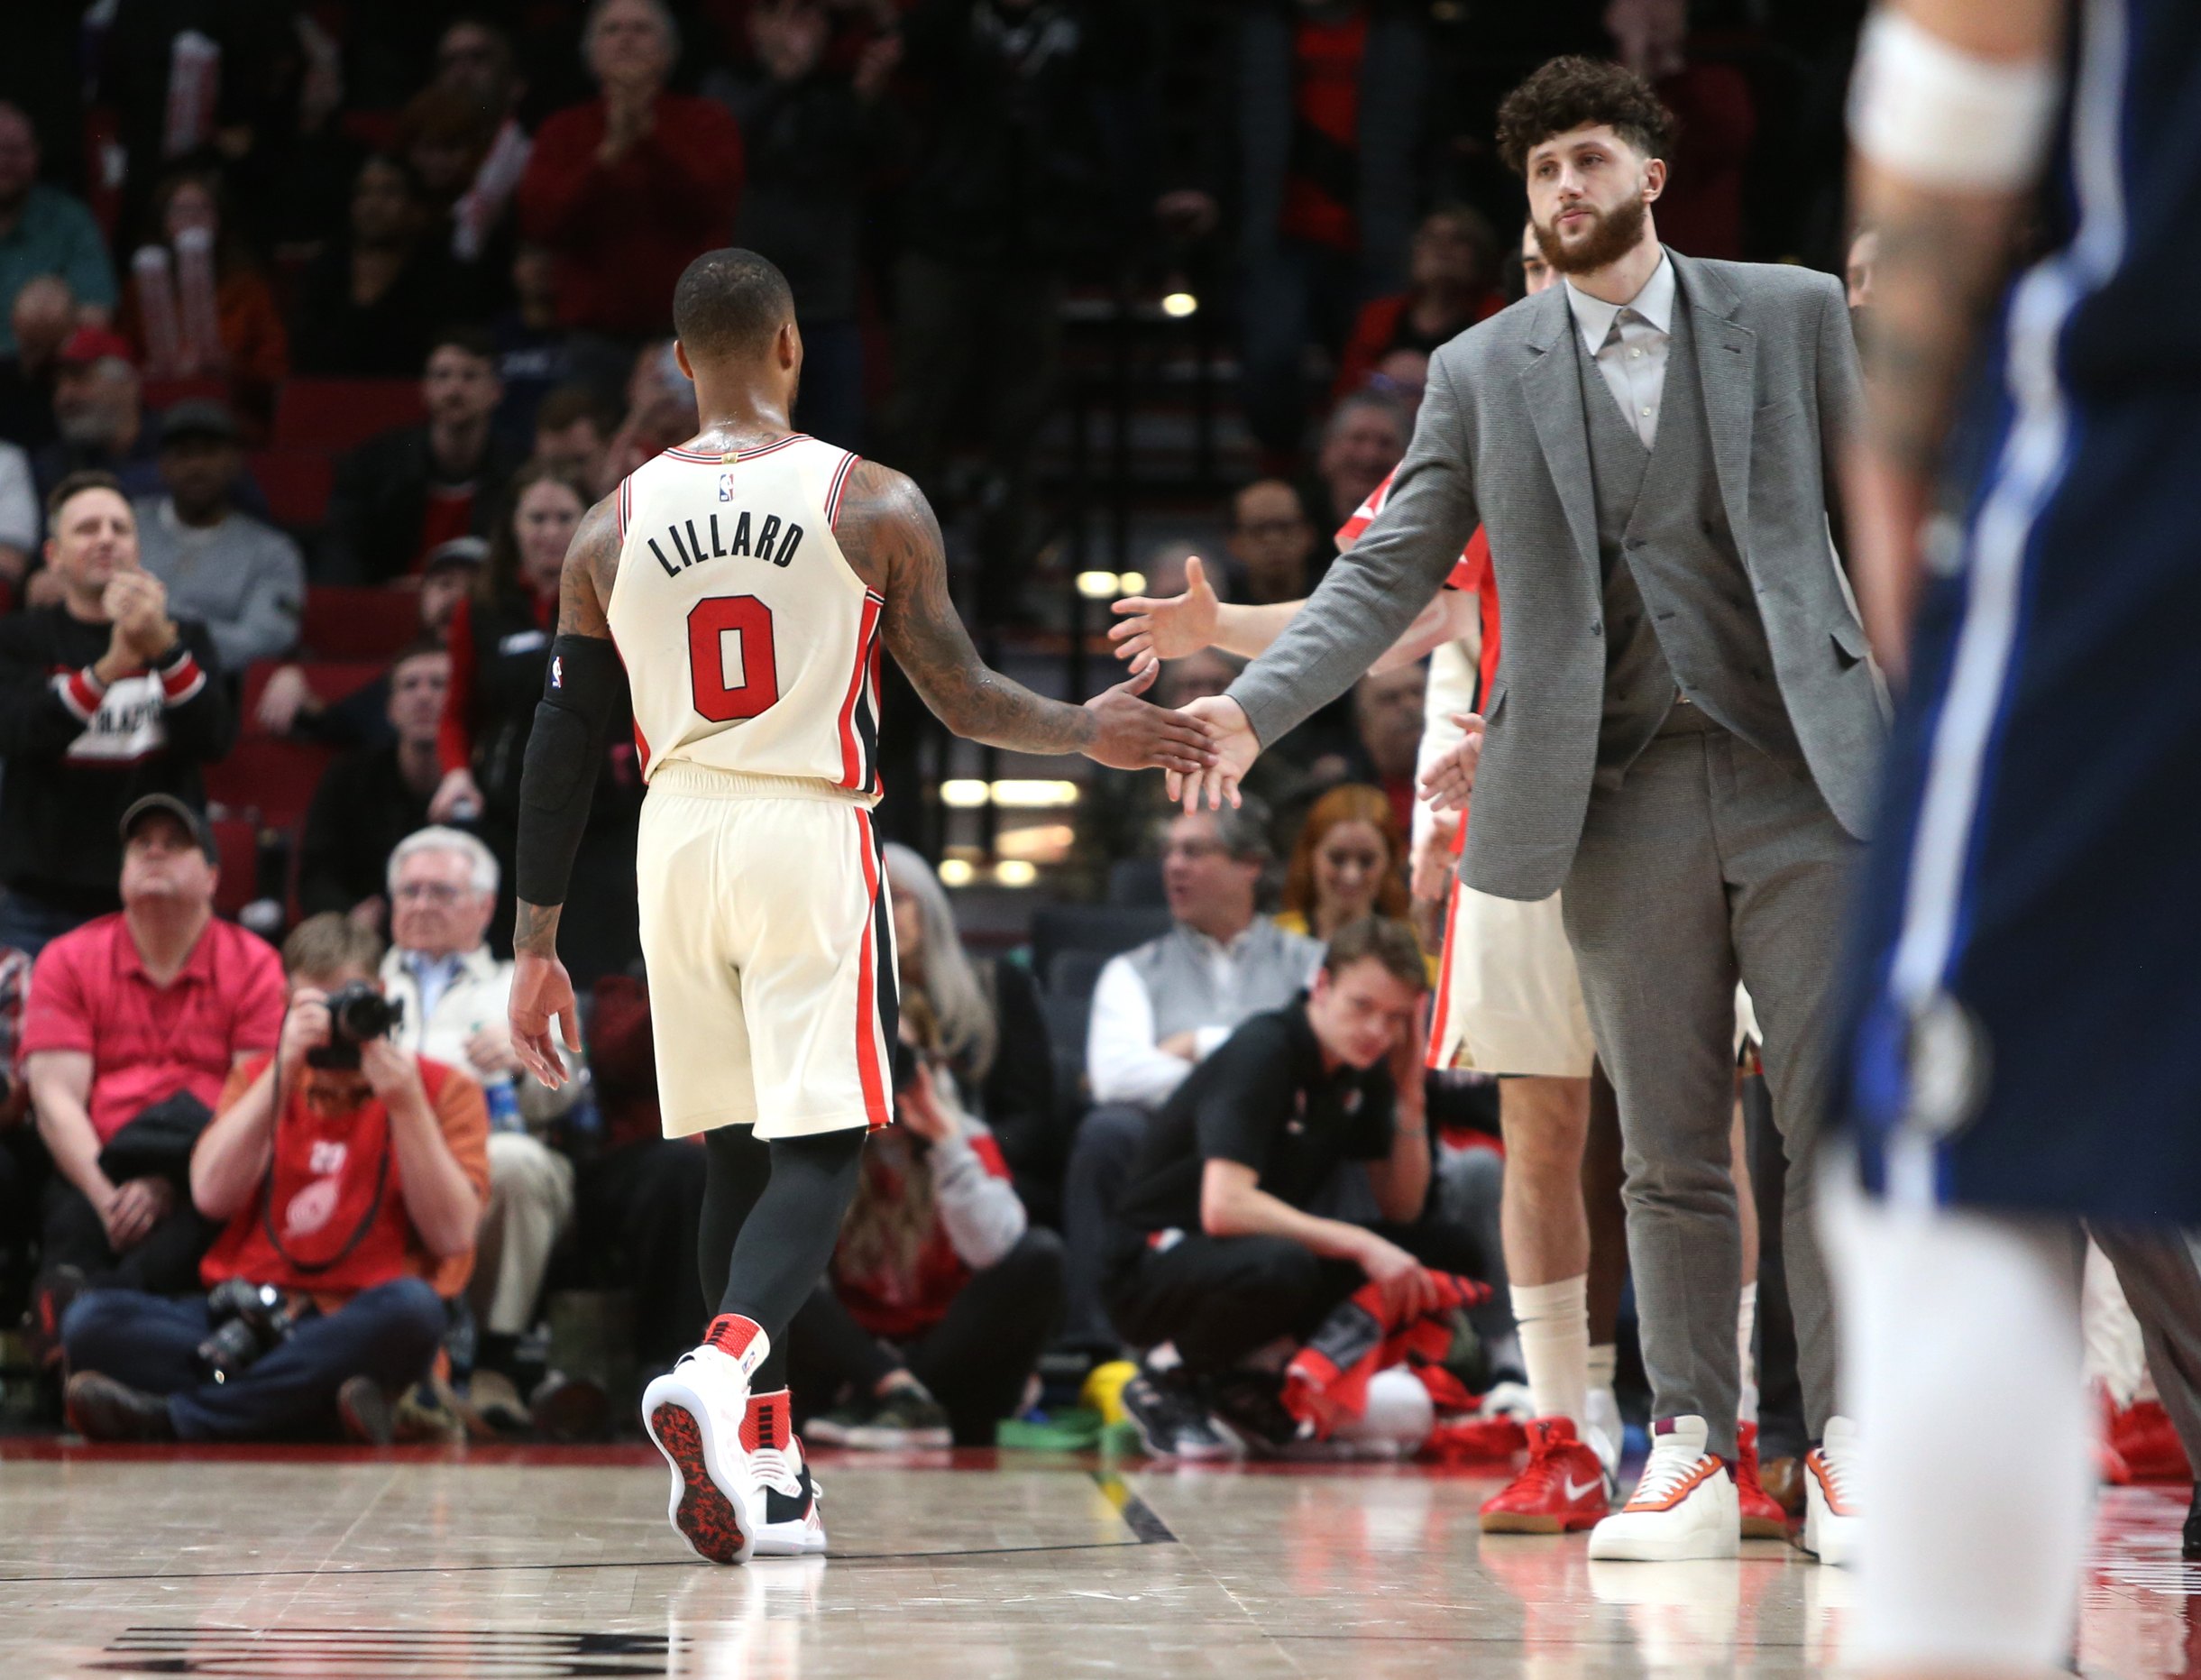 Jusuf Nurkic Q&A: The Blazers, Damian Lillard and more - Sports Illustrated